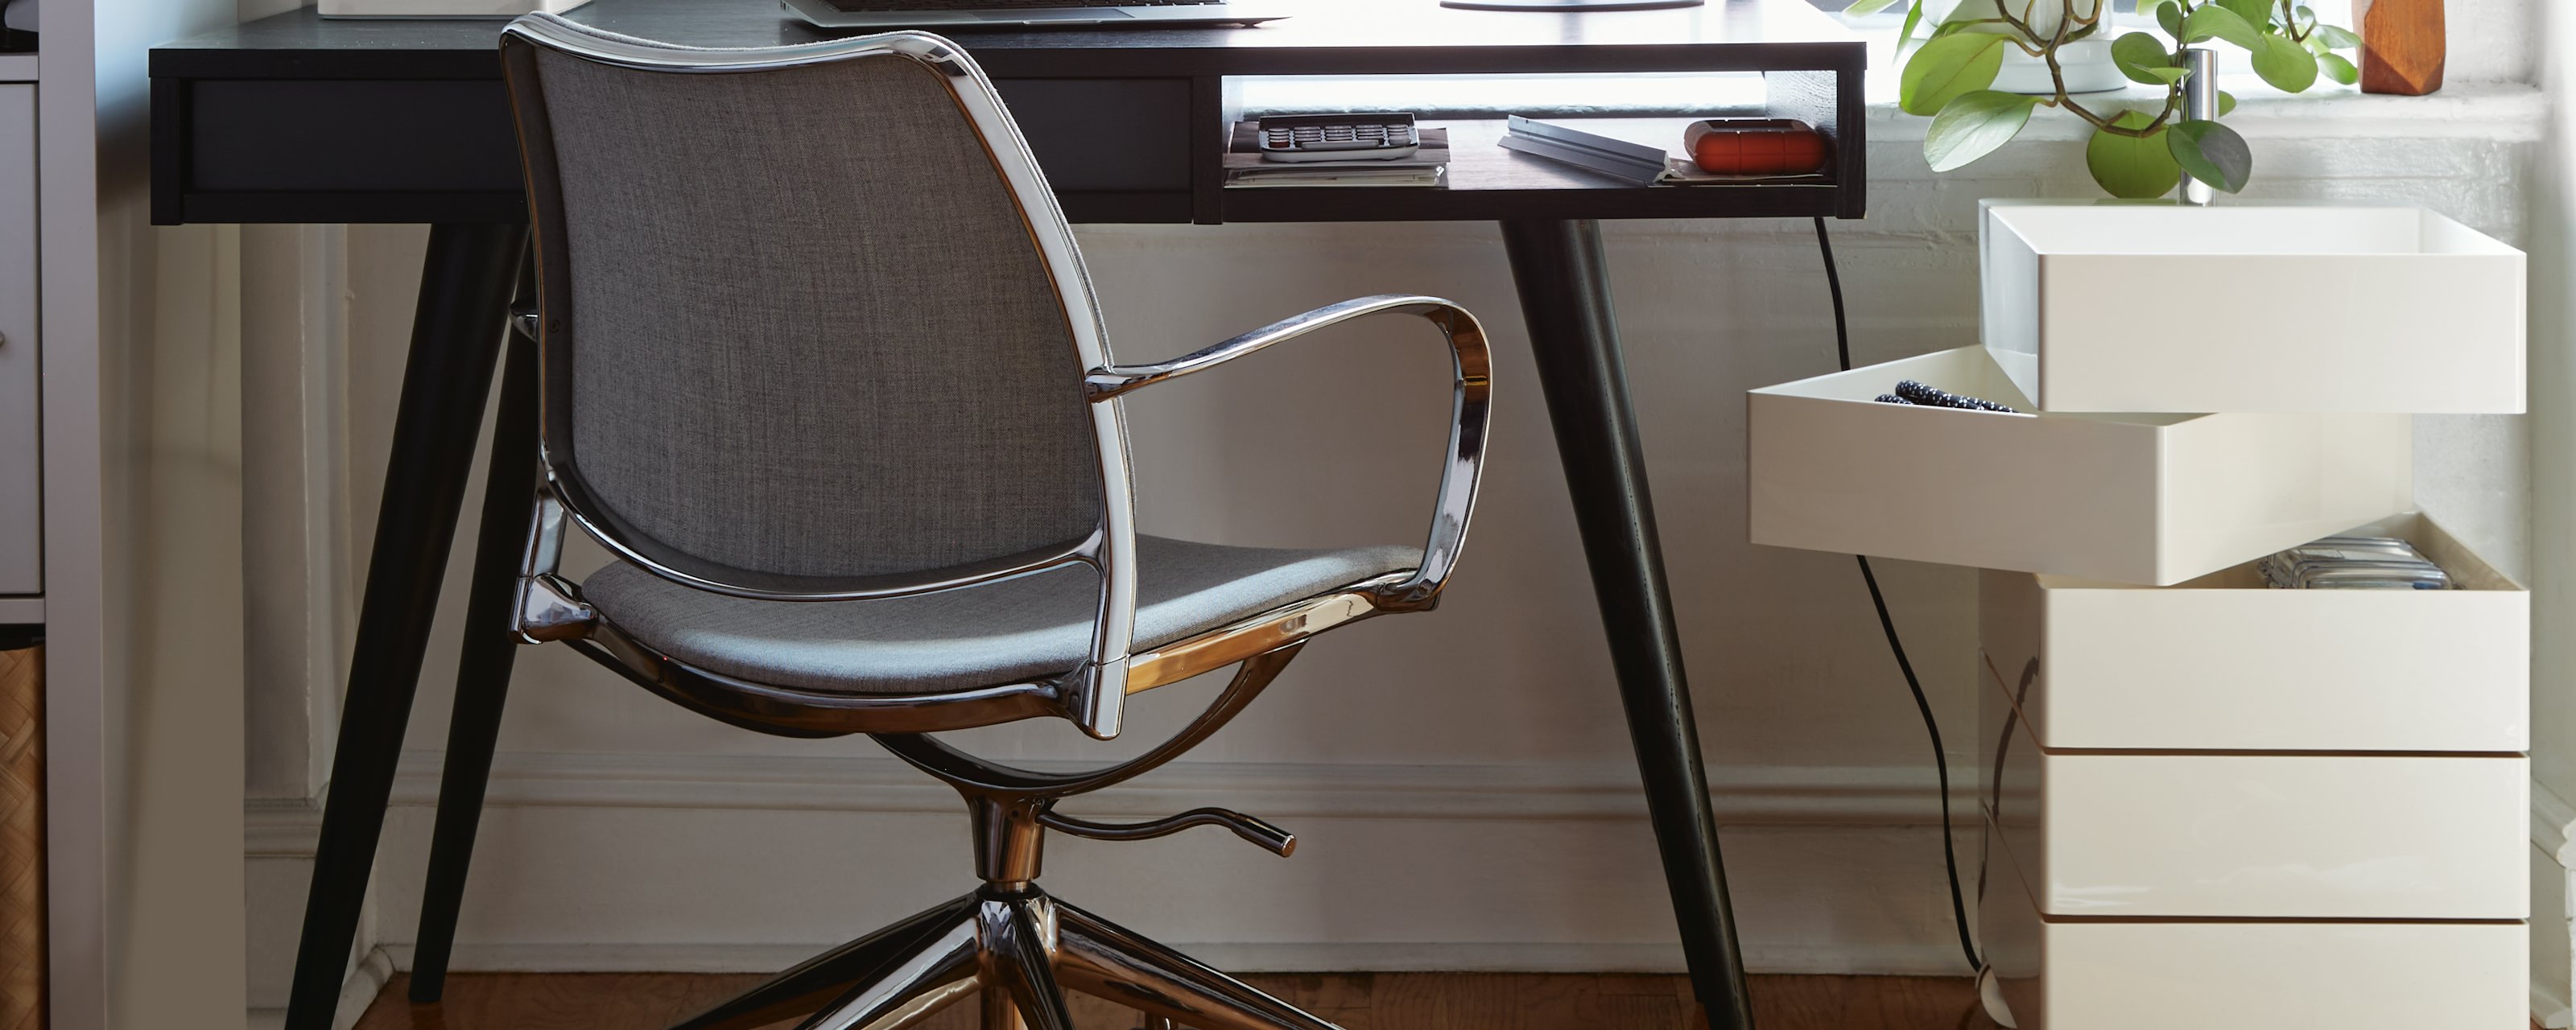 Magis 360 Degree Container and Gas Tank Chair in a home office setting